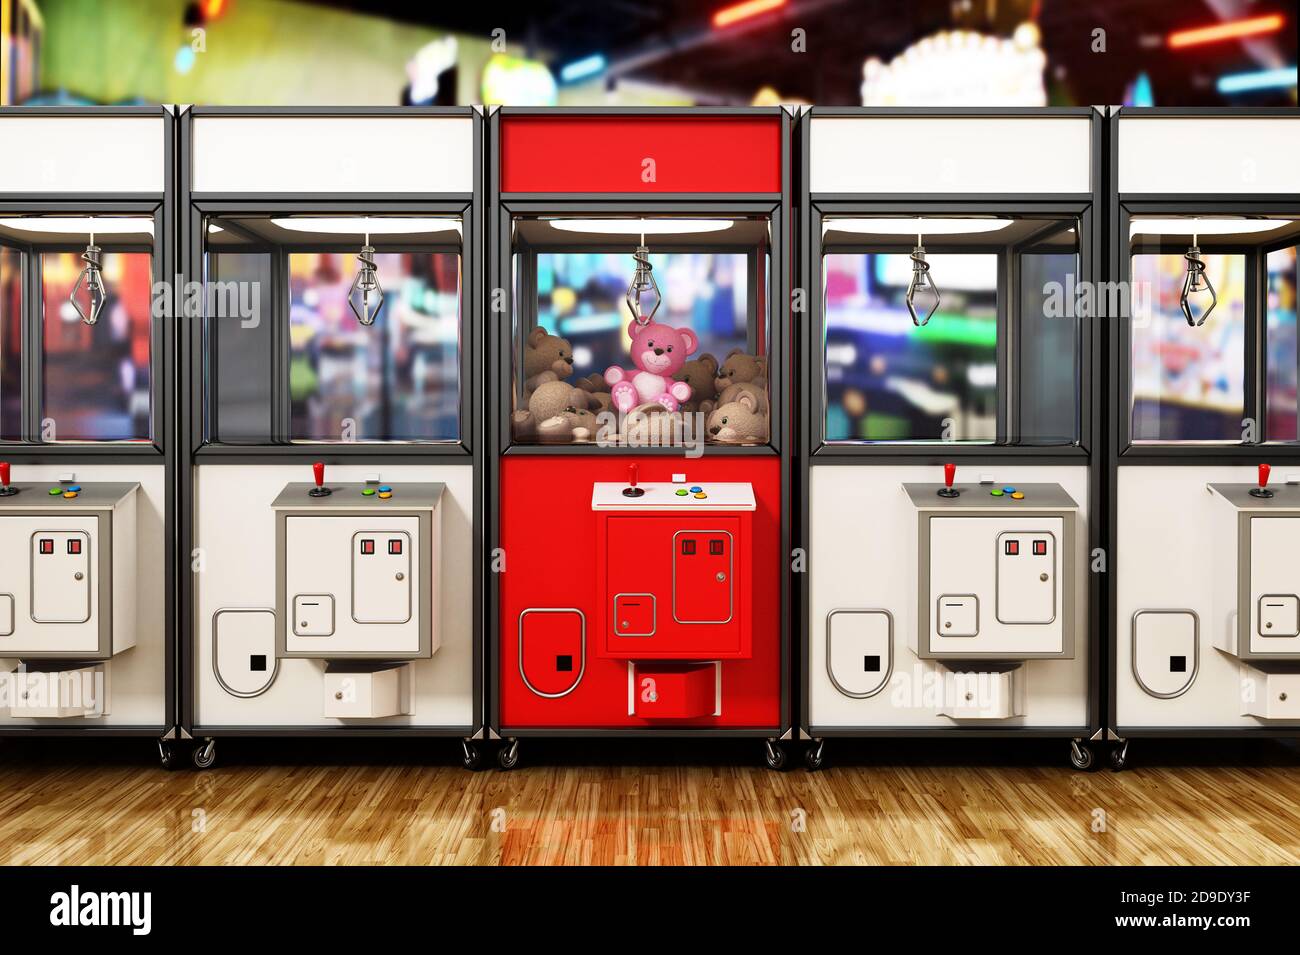 Red box stands out among toys vending machines with crane. 3D illustration. Stock Photo